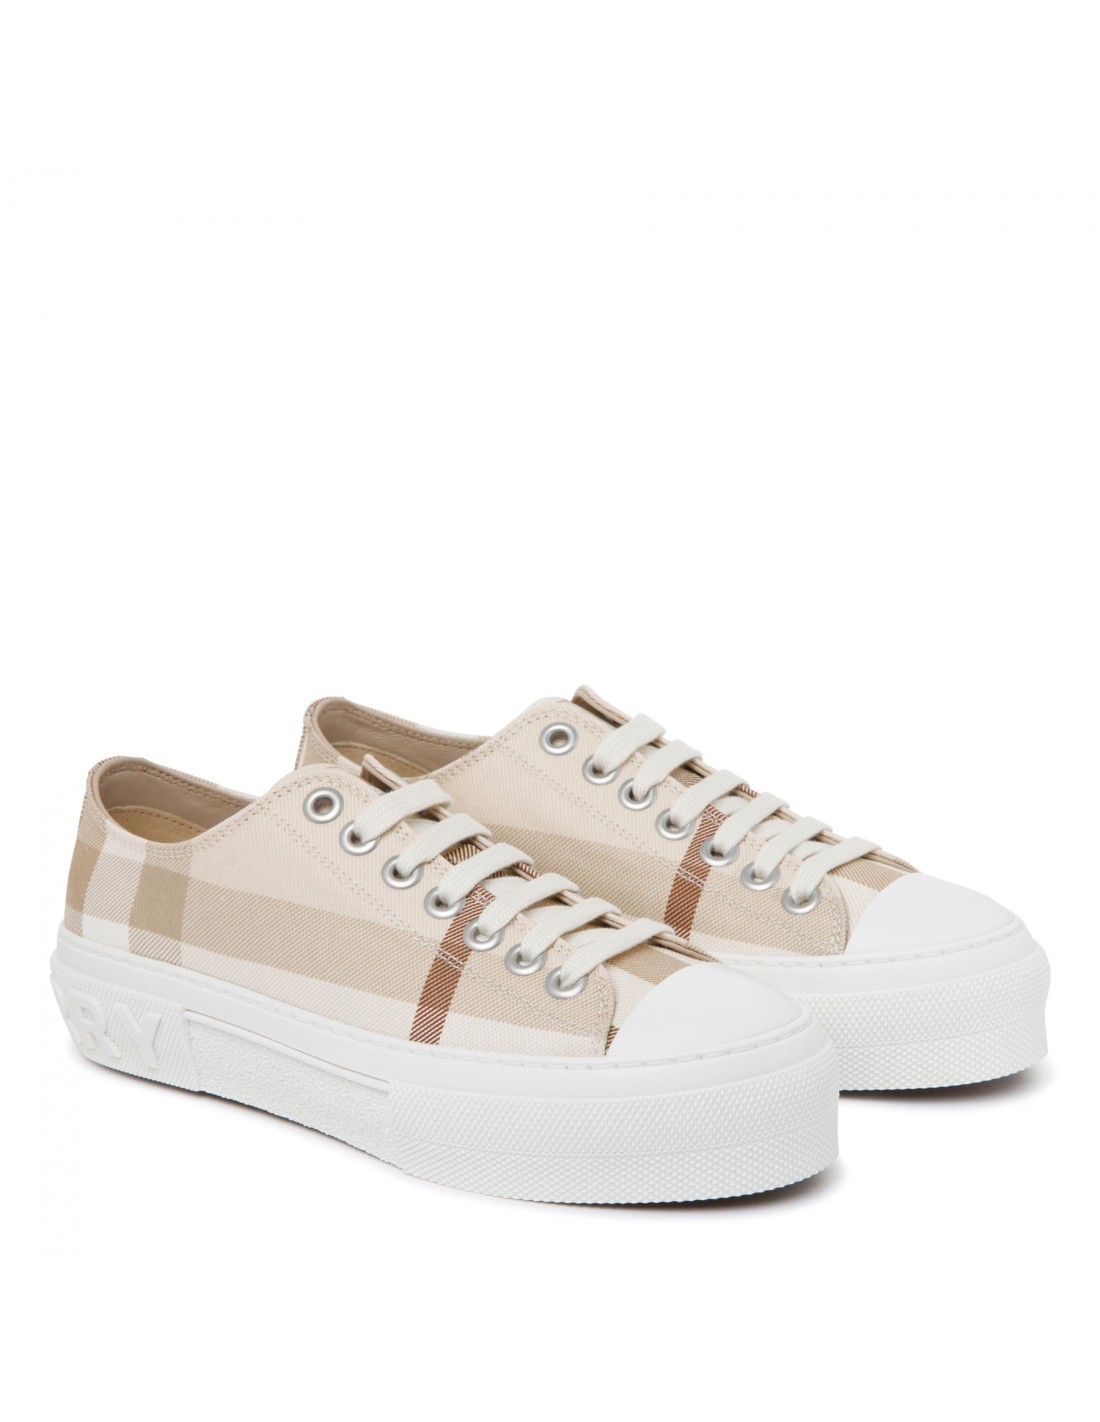 Jack low check sneakers